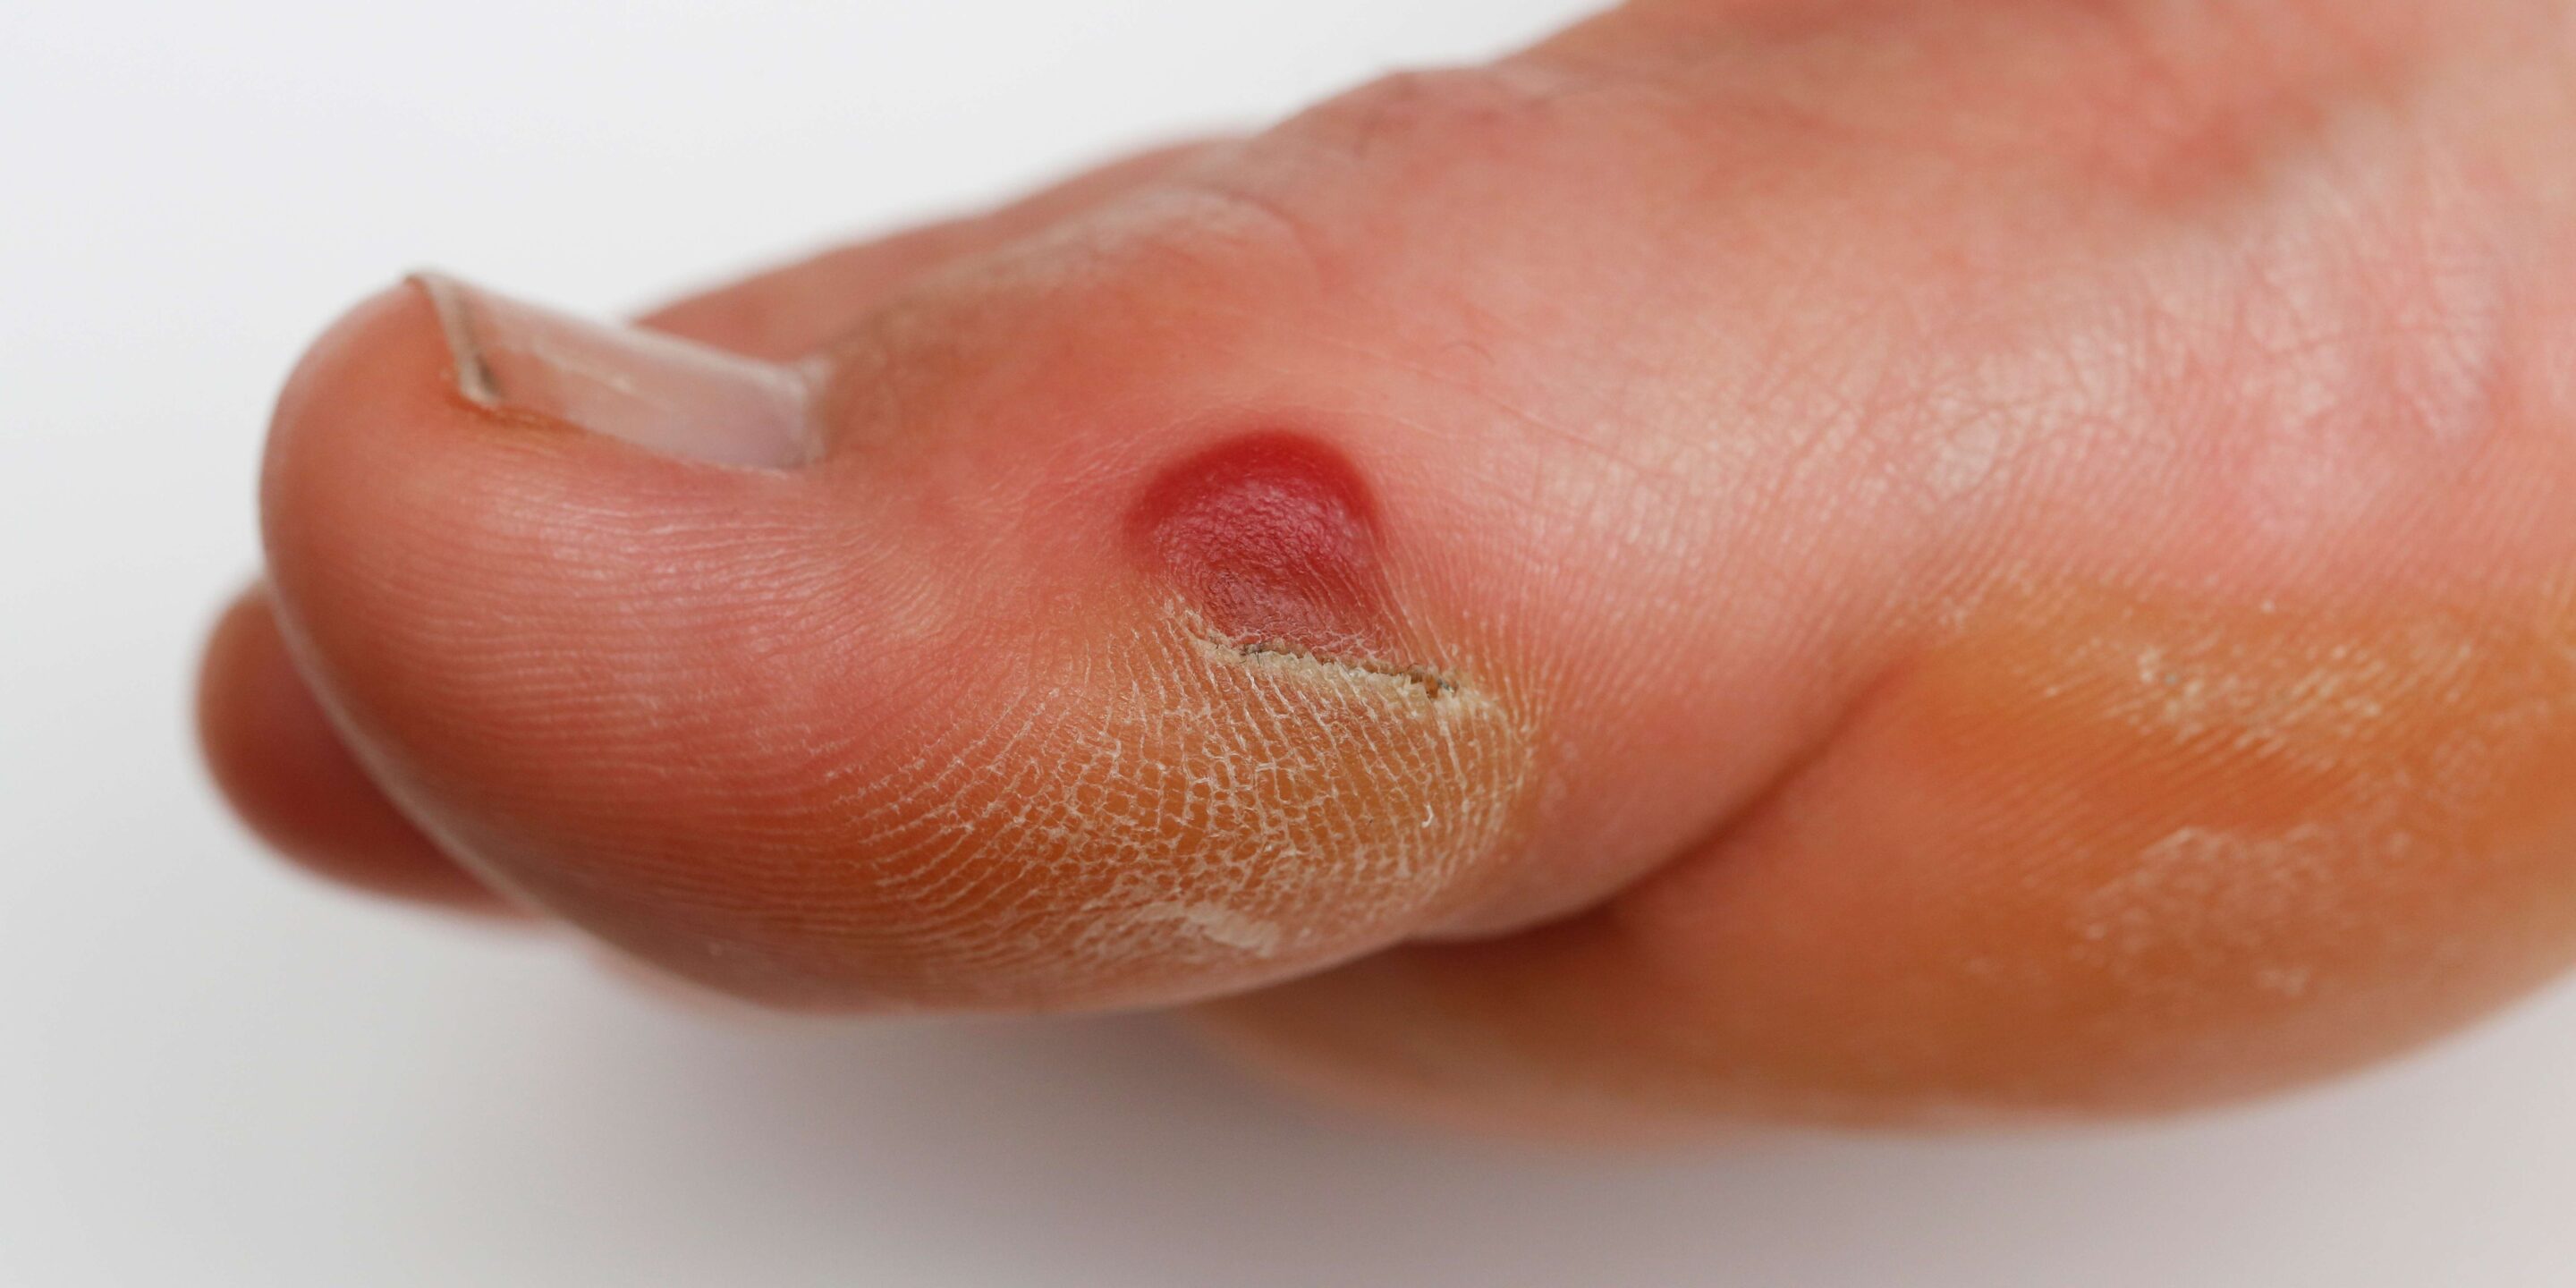 What to Do [and Not Do] for Treating Blood Blisters